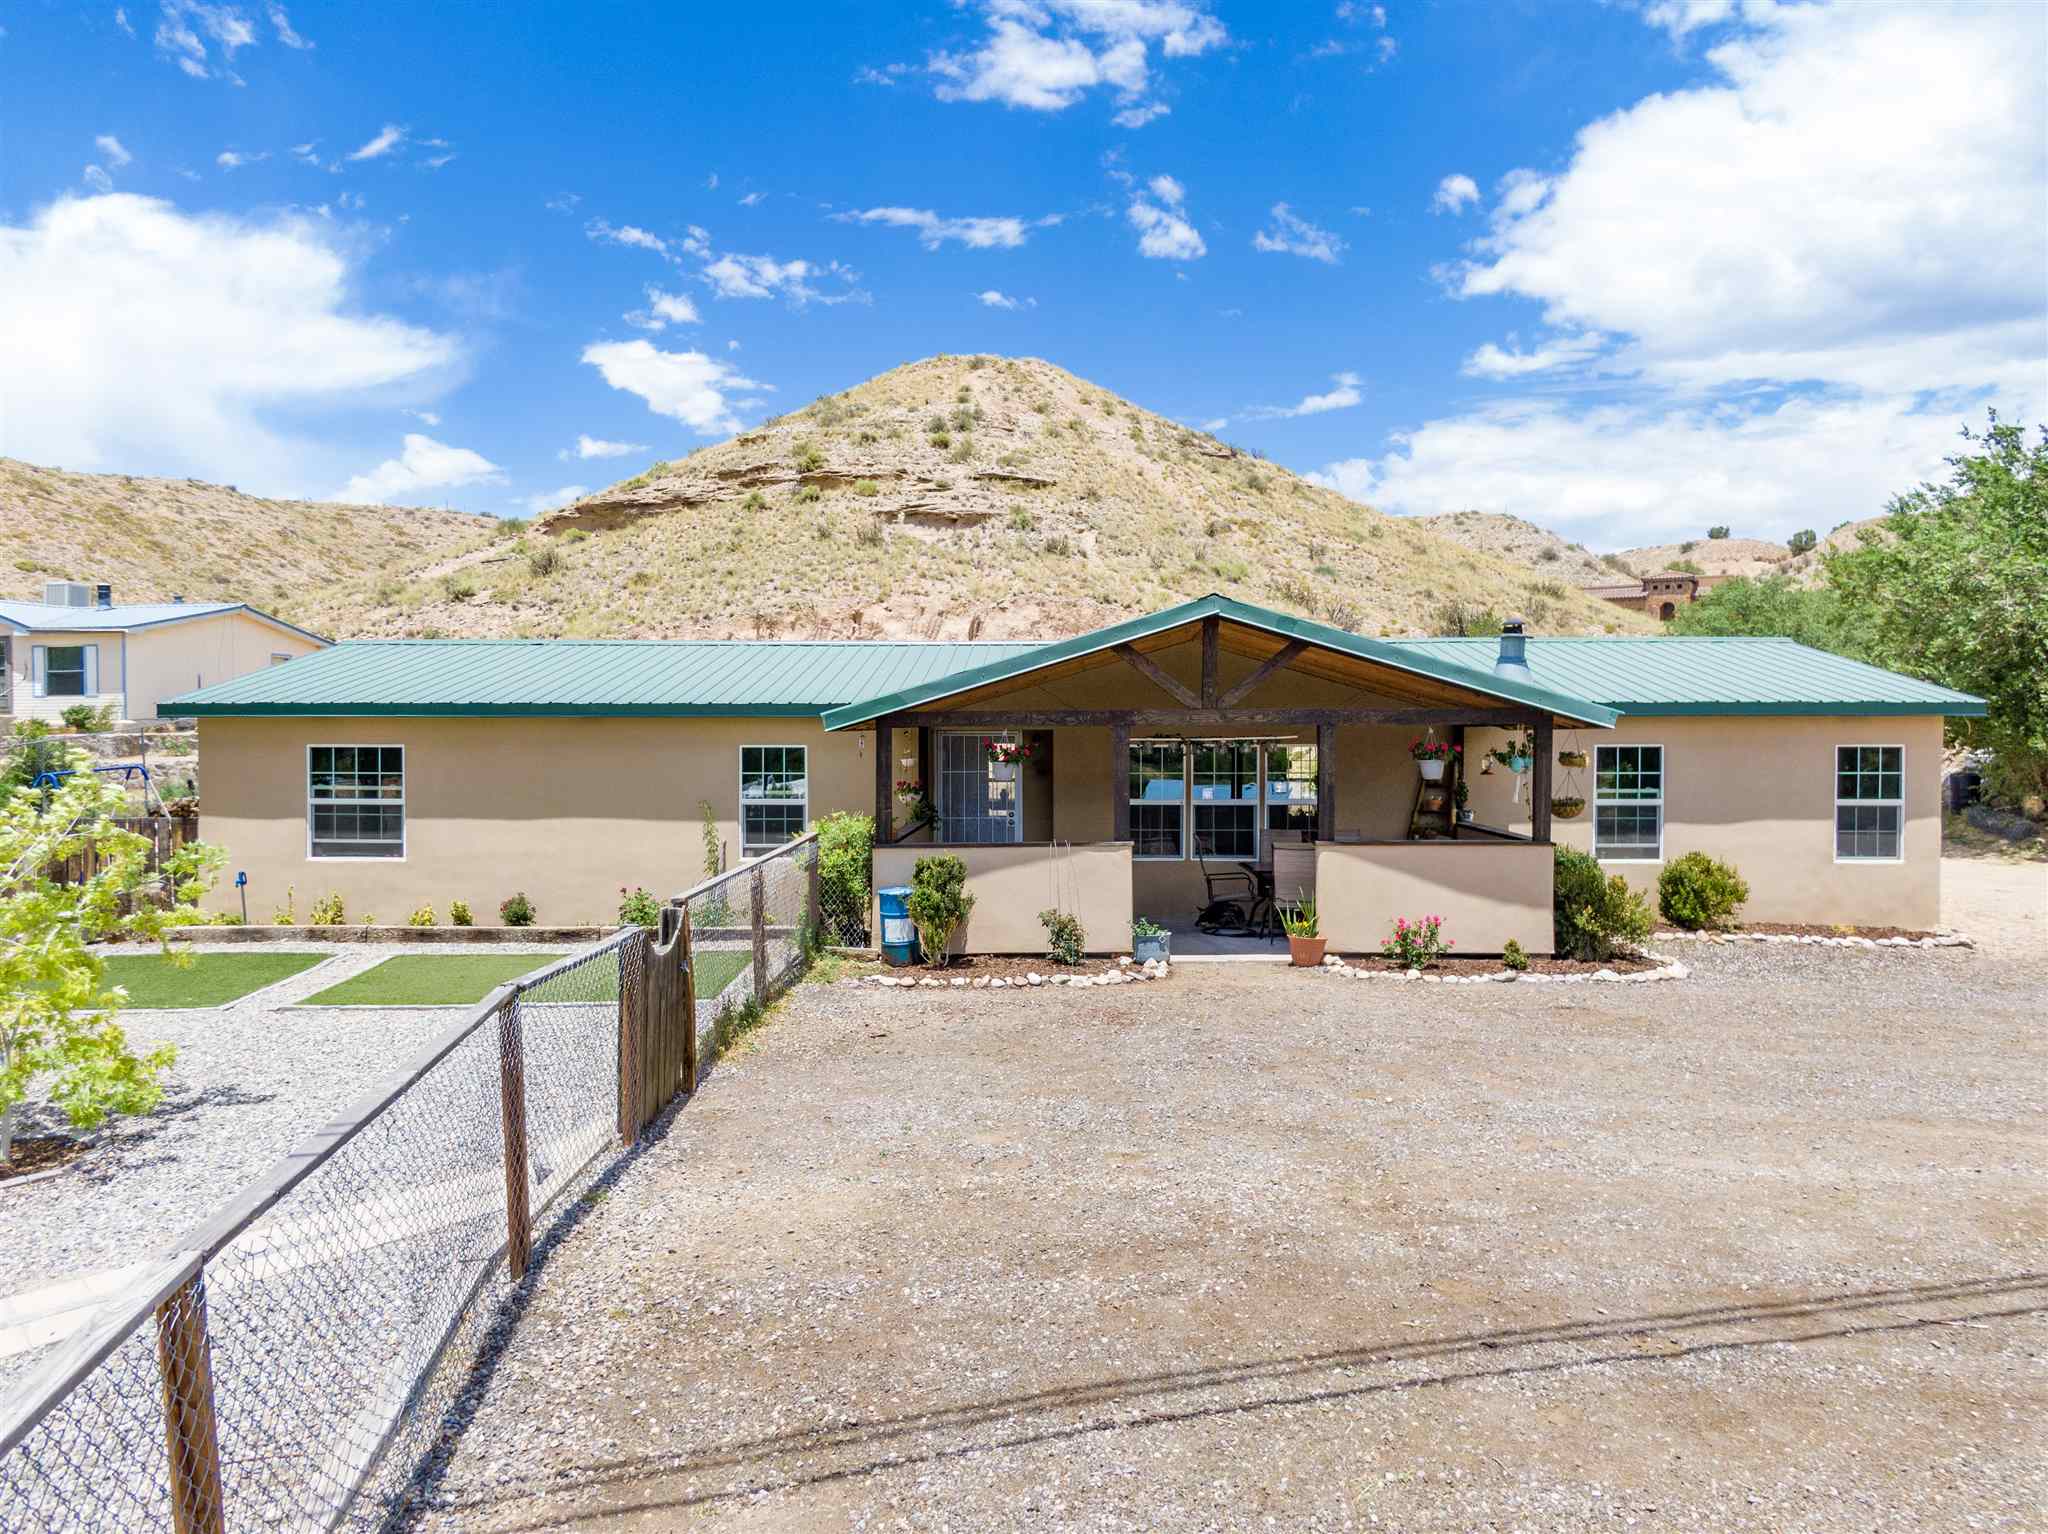 282 NM 76, Cuarteles, New Mexico 87567, 4 Bedrooms Bedrooms, ,3 BathroomsBathrooms,Residential,For Sale,282 NM 76,202002606